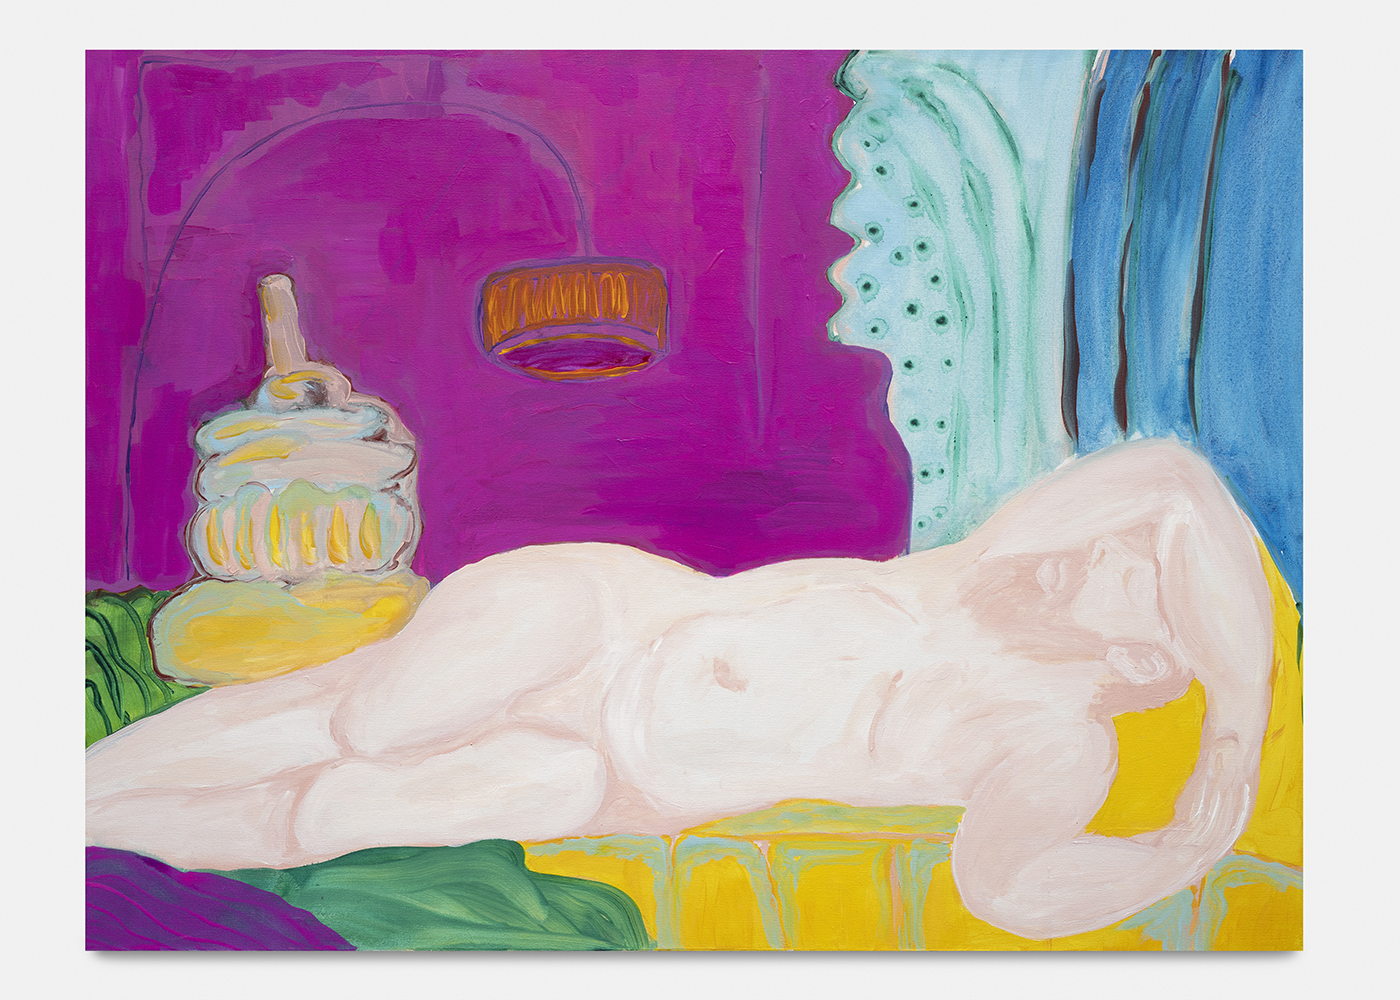 SHAGHA ARIANNIA, Here lies Damian, napping with a pink light, 91x122cm, acrylique sur toile ©Nicolas Brasseur